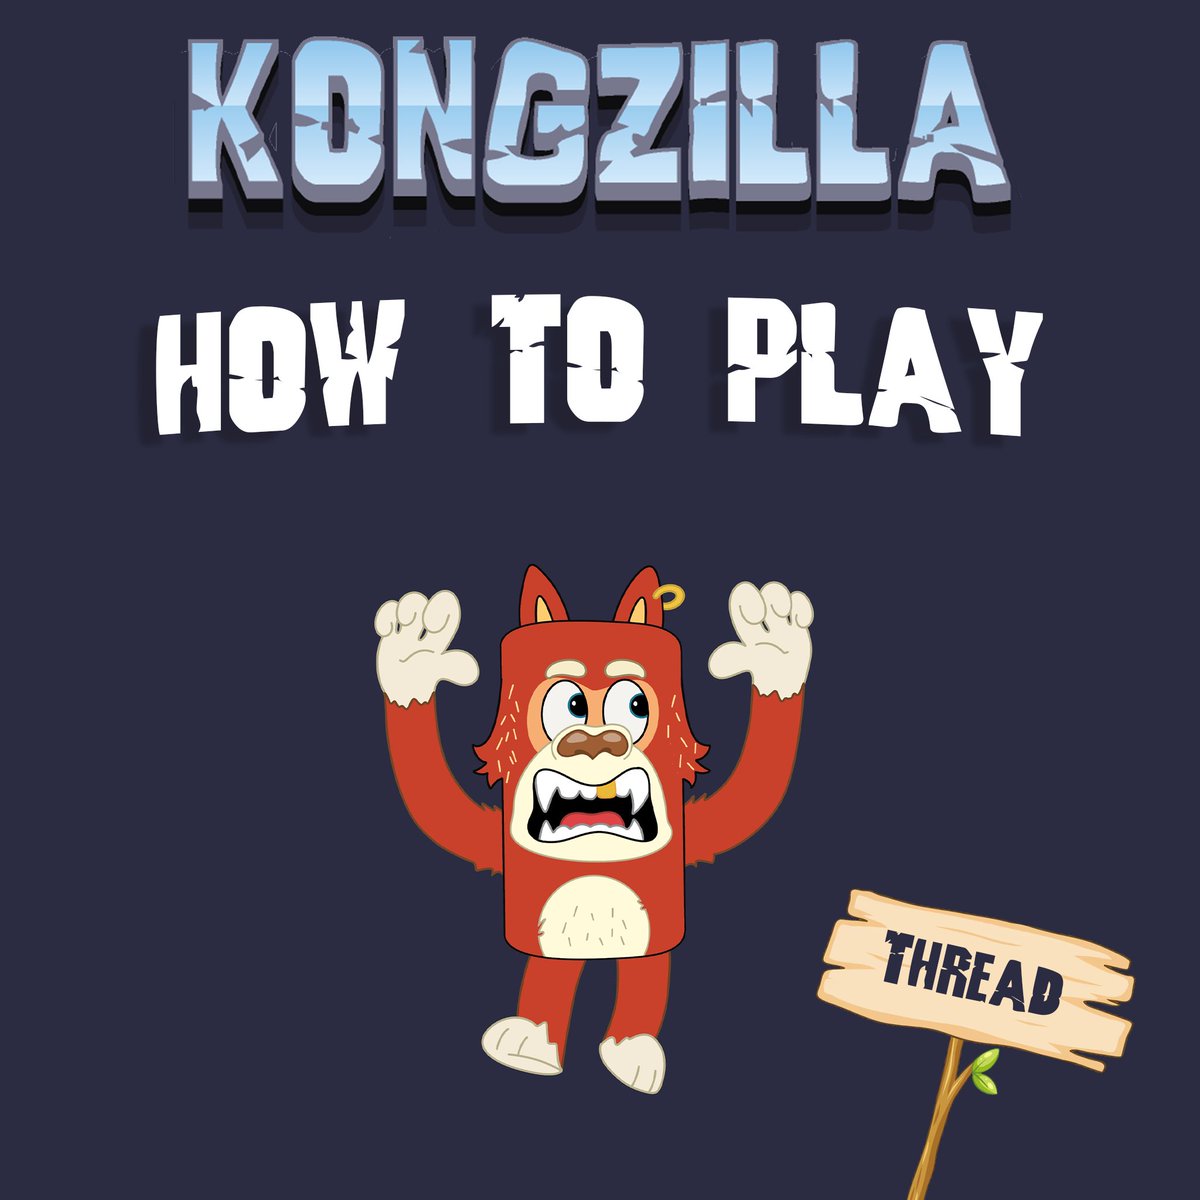 [Thread] Discover Kongzilla - A Play-to-Earn Game on the Avalanche Blockchain!

Kongzilla is based on $KONG, built on the Avalanche blockchain. There are two NFT generations: Gen0 and Gen1, each with their own advantages in the game.  

1/5